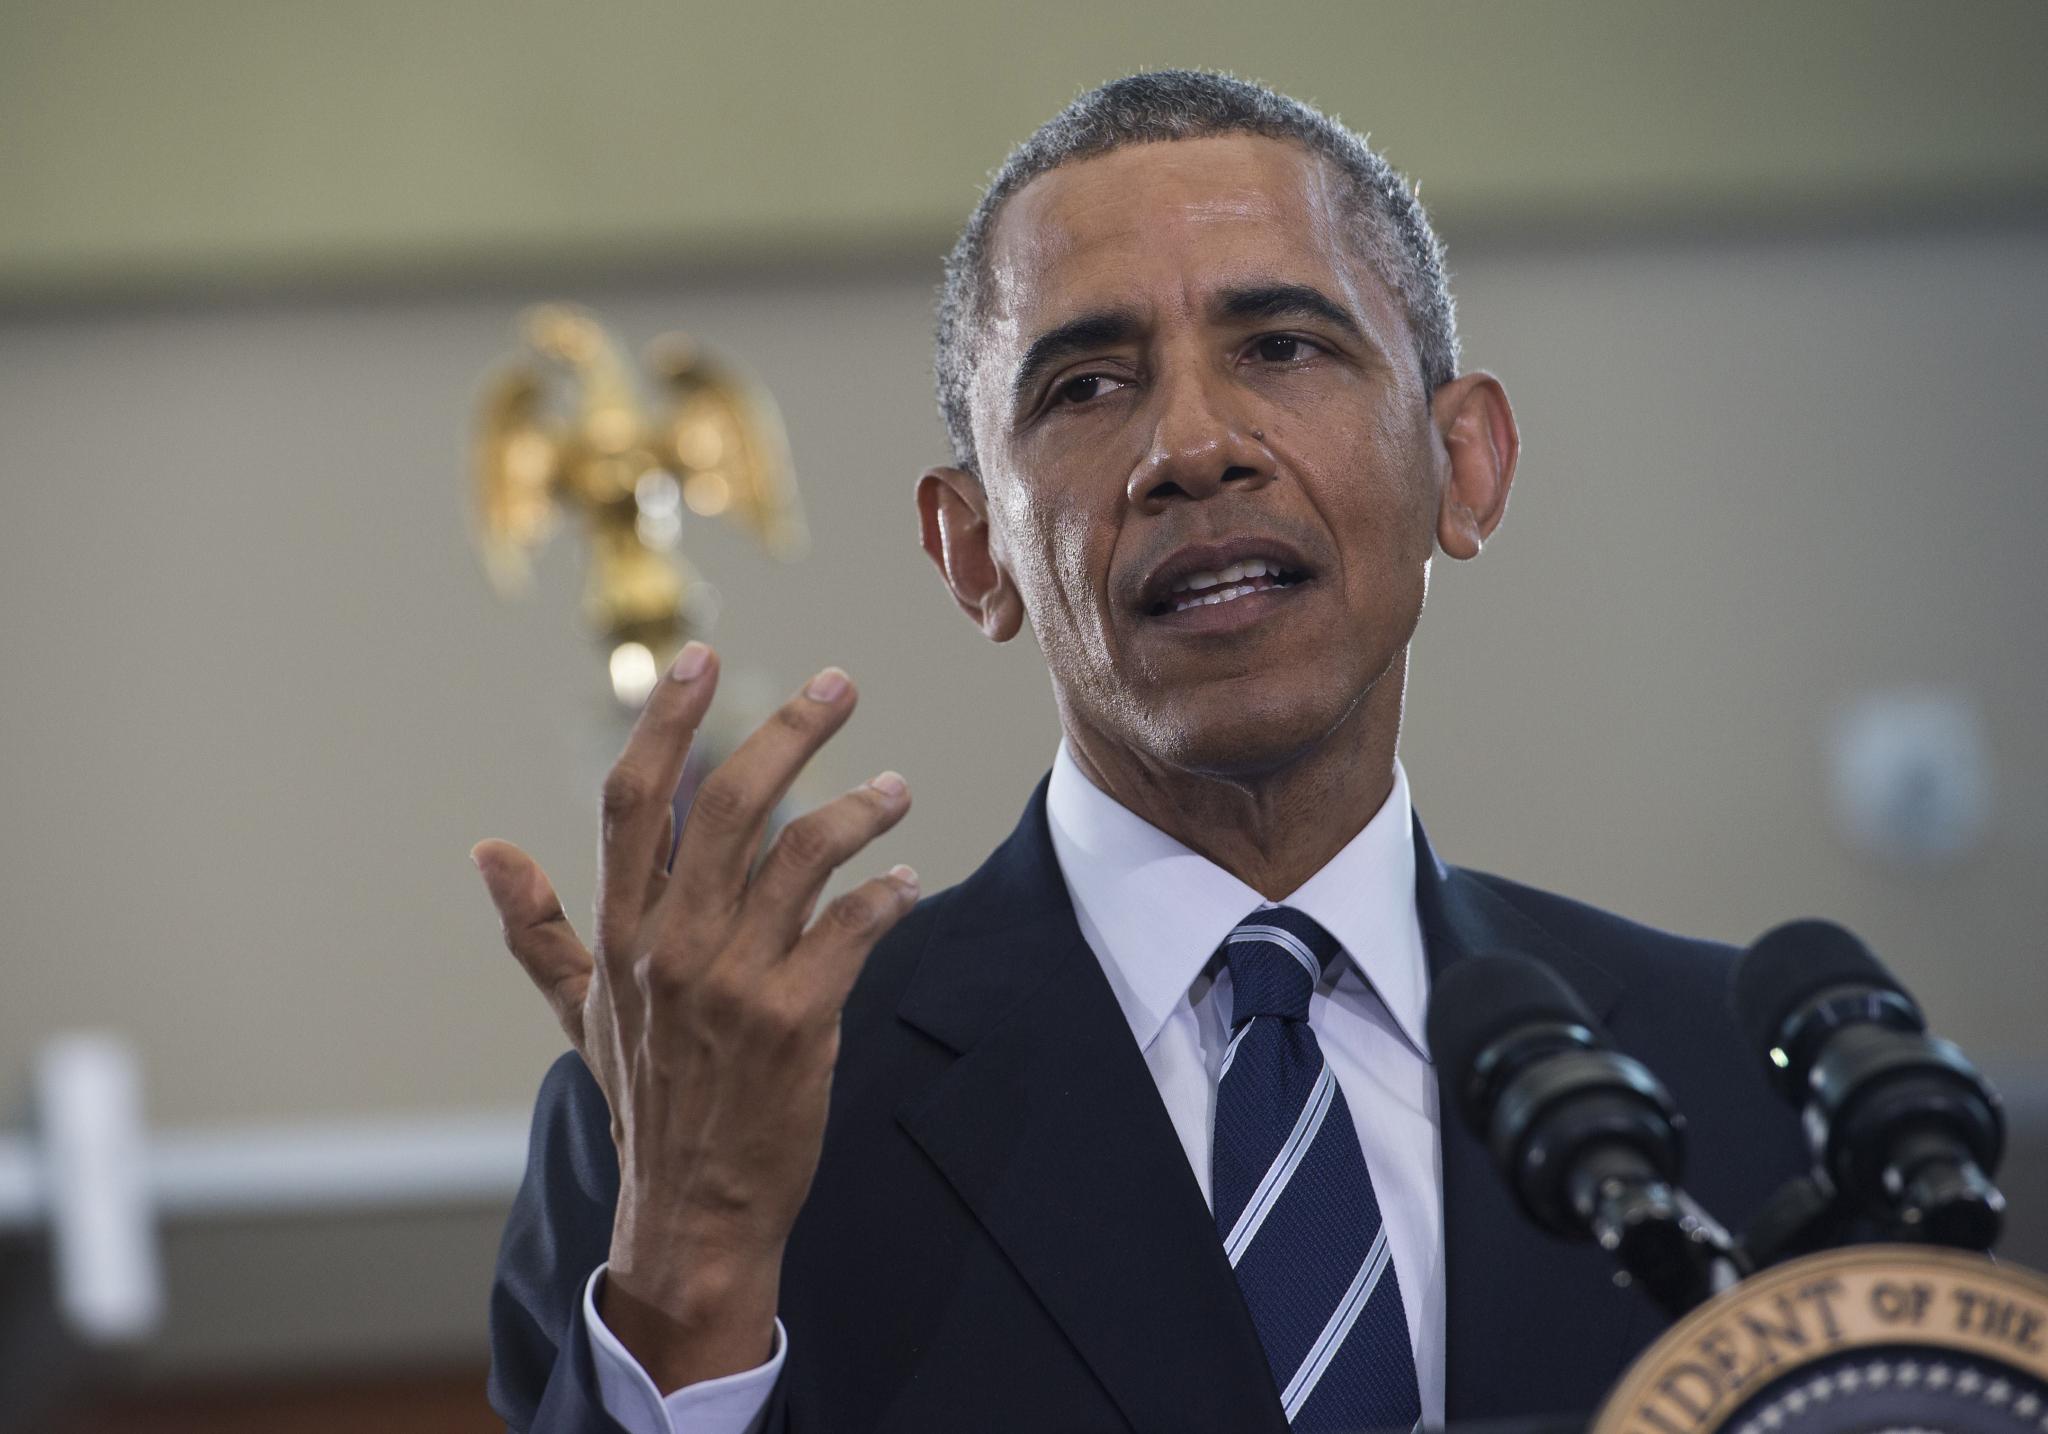 President Obama on Laquan McDonald Video: 'I Was Deeply Disturbed'